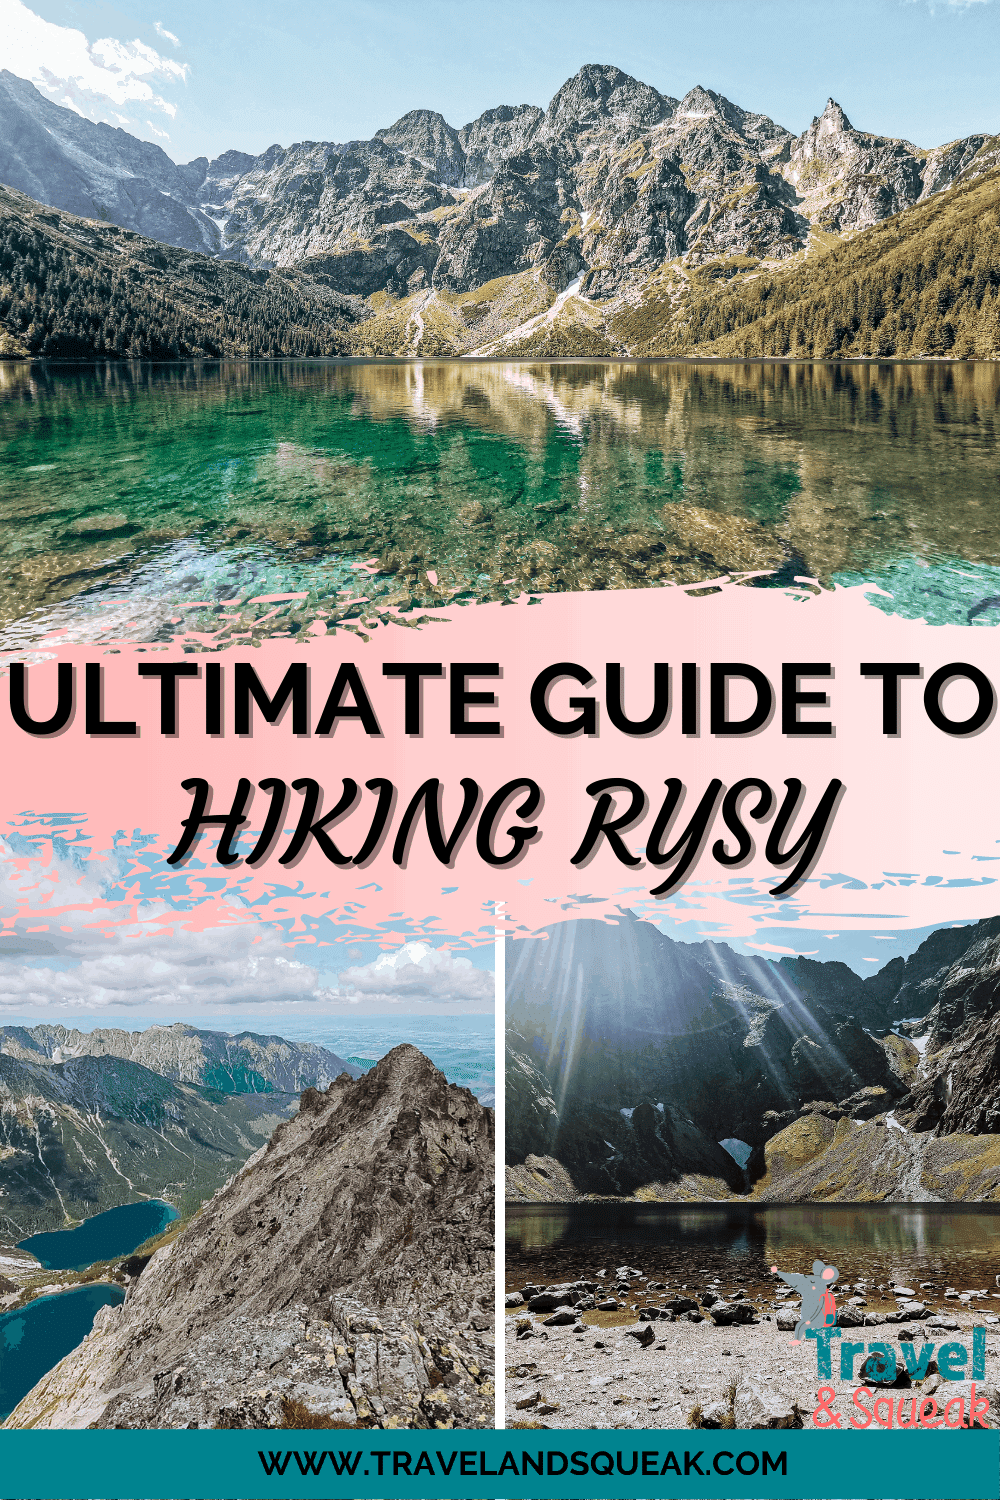 The Ultimate Guide to Hiking Rysy Mountain - Travel and Squeak